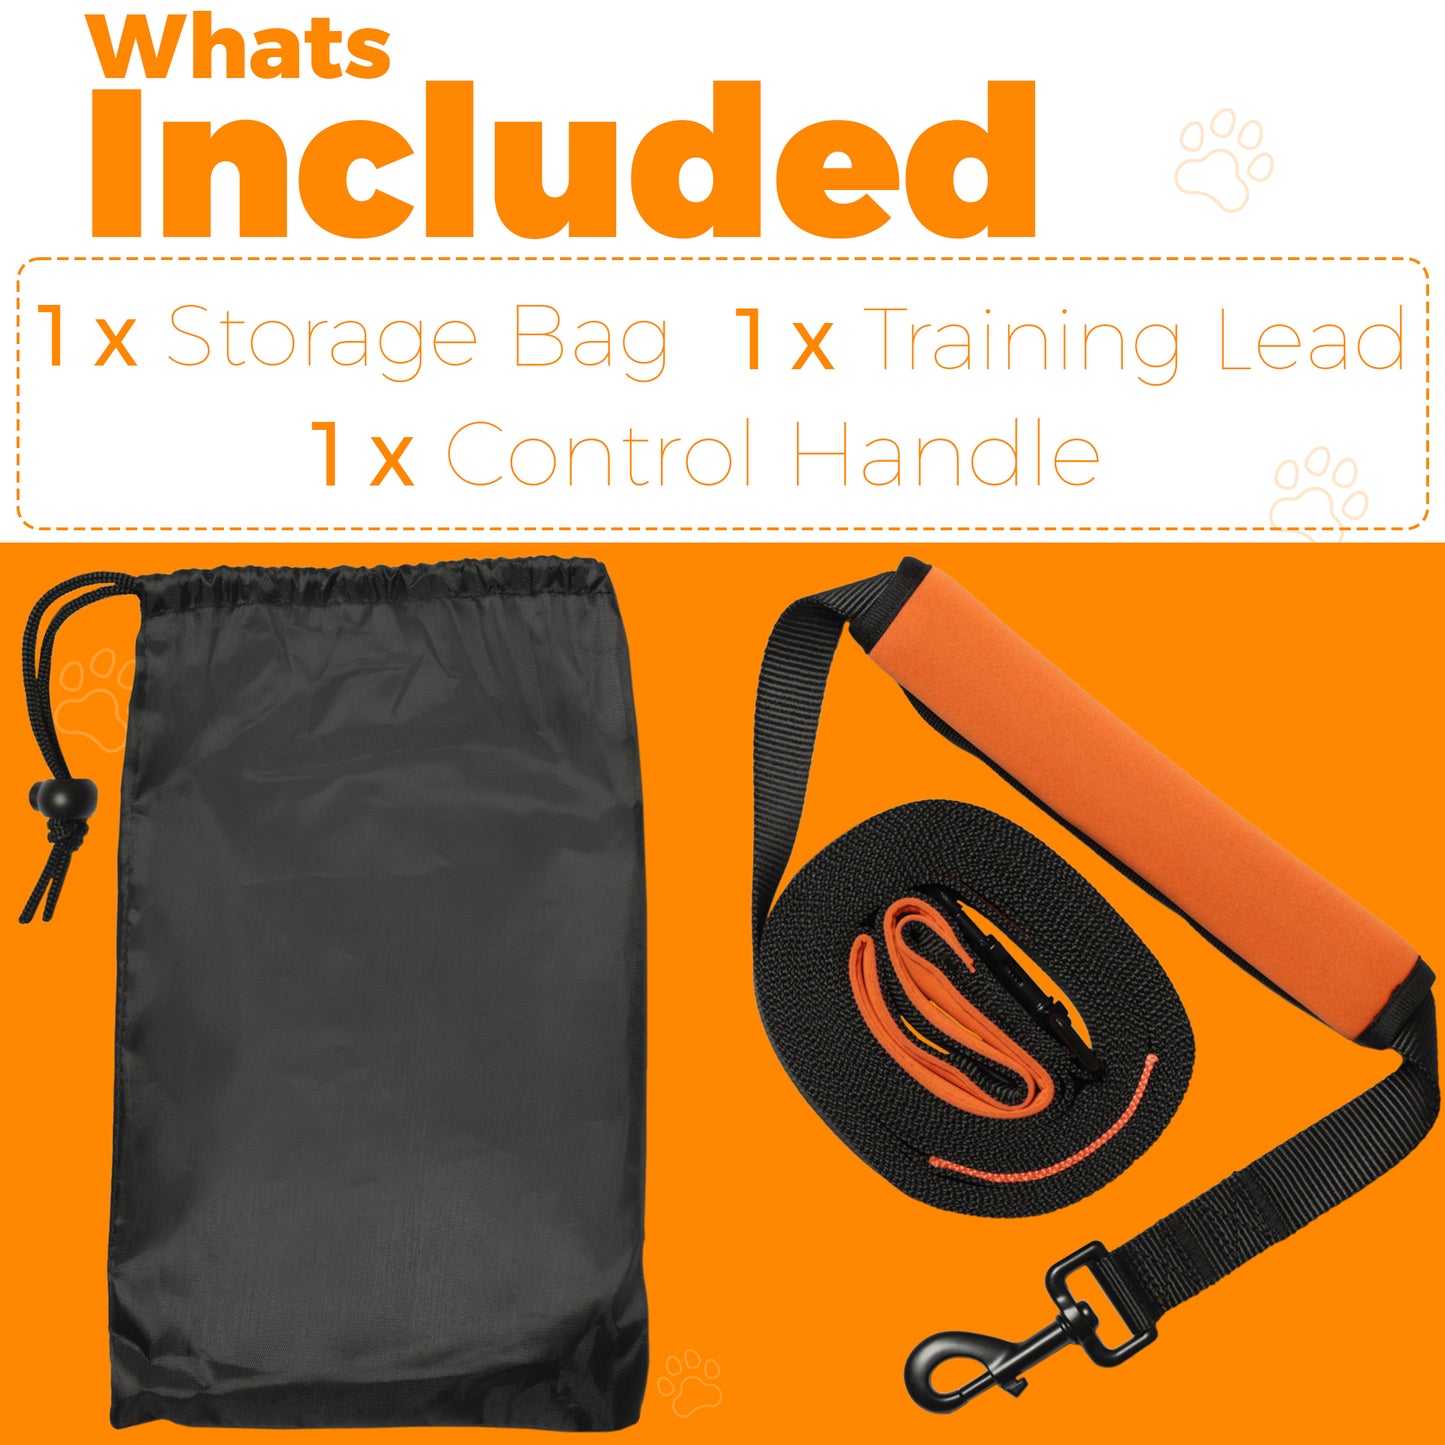 5m Nylon Training Lead - What is Included 